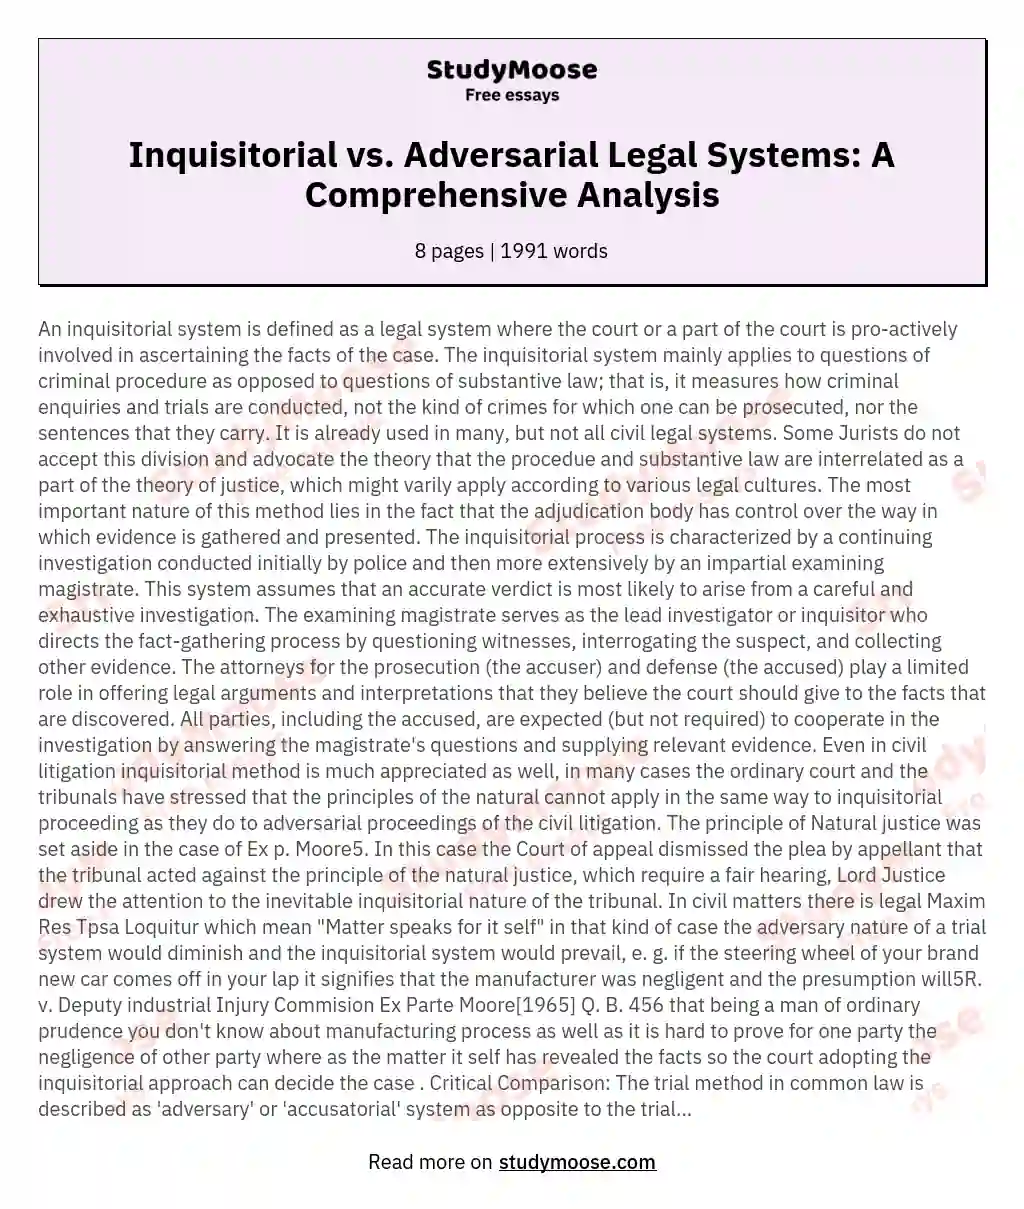 Inquisitorial vs. Adversarial Legal Systems: A Comprehensive Analysis essay